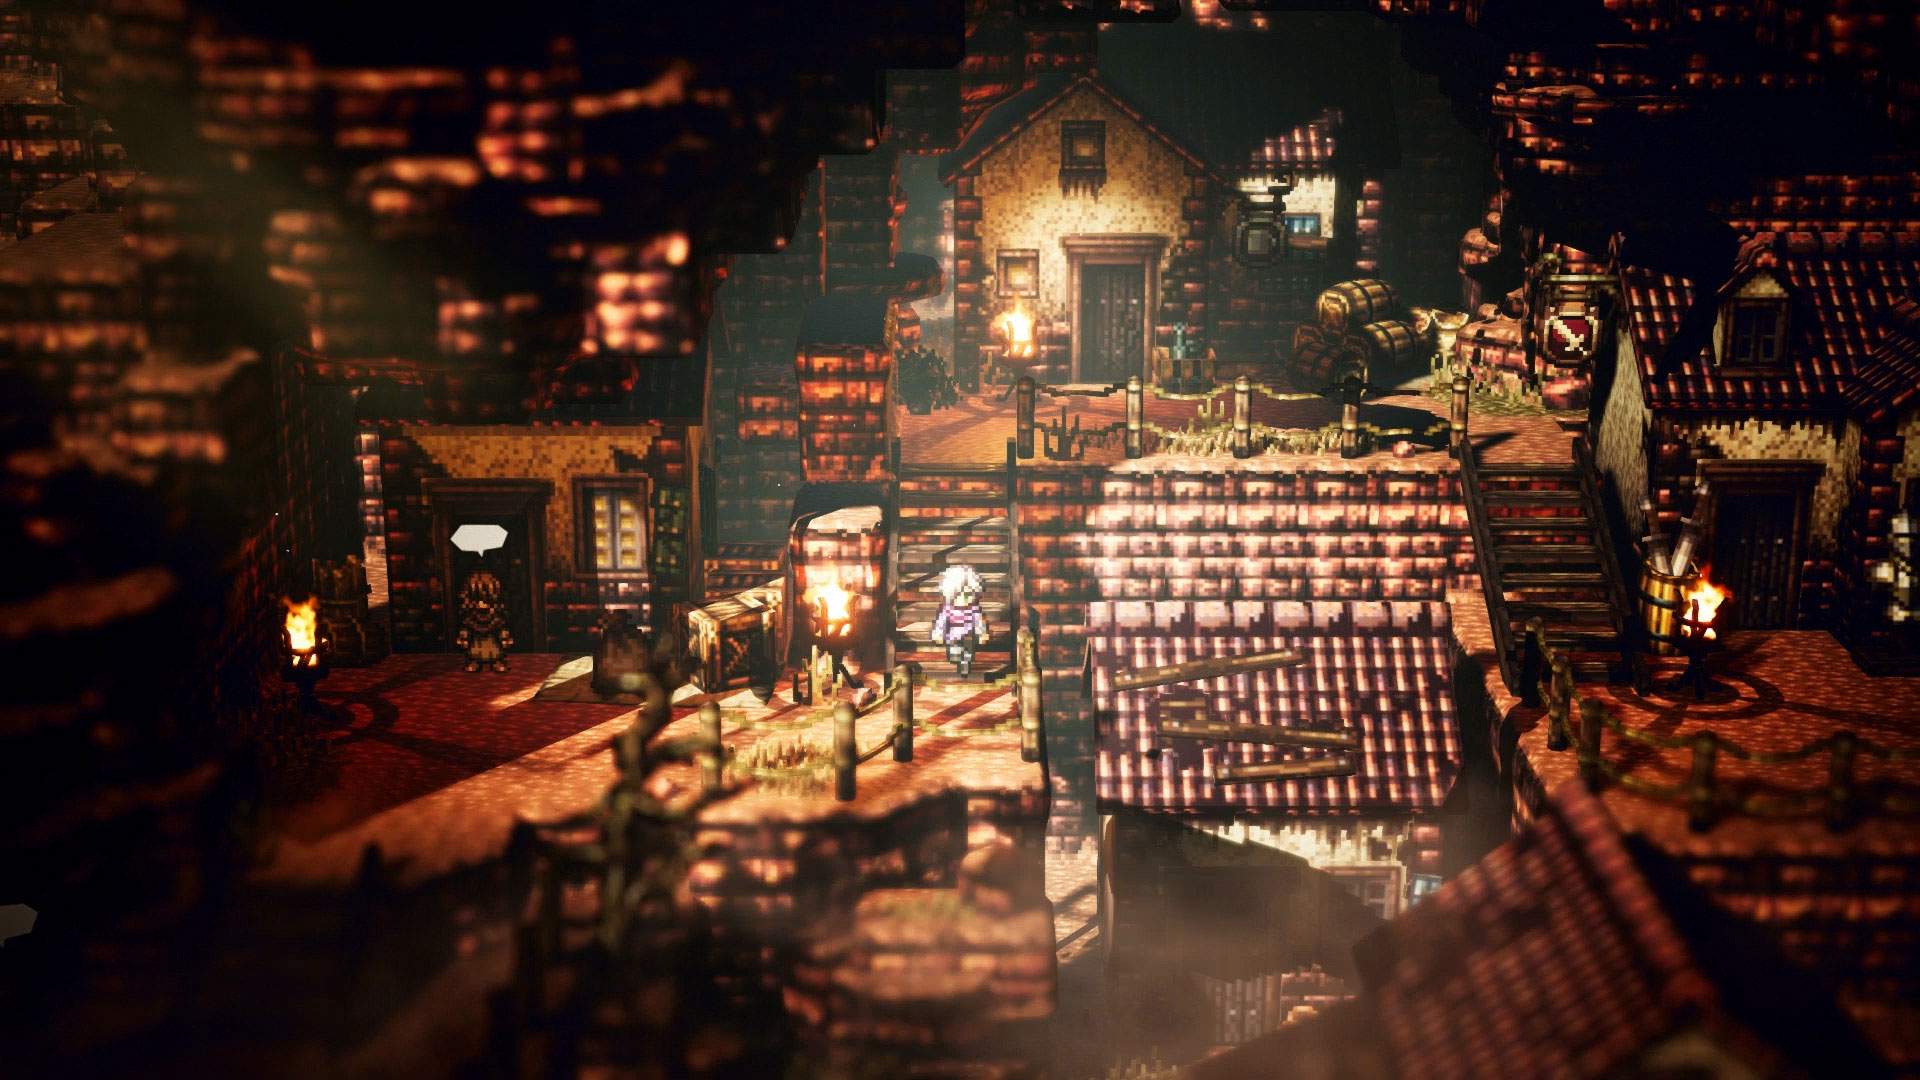 Gameplay screenshot of Therion walking down stairs in the middle of a medieval-style town at dusk